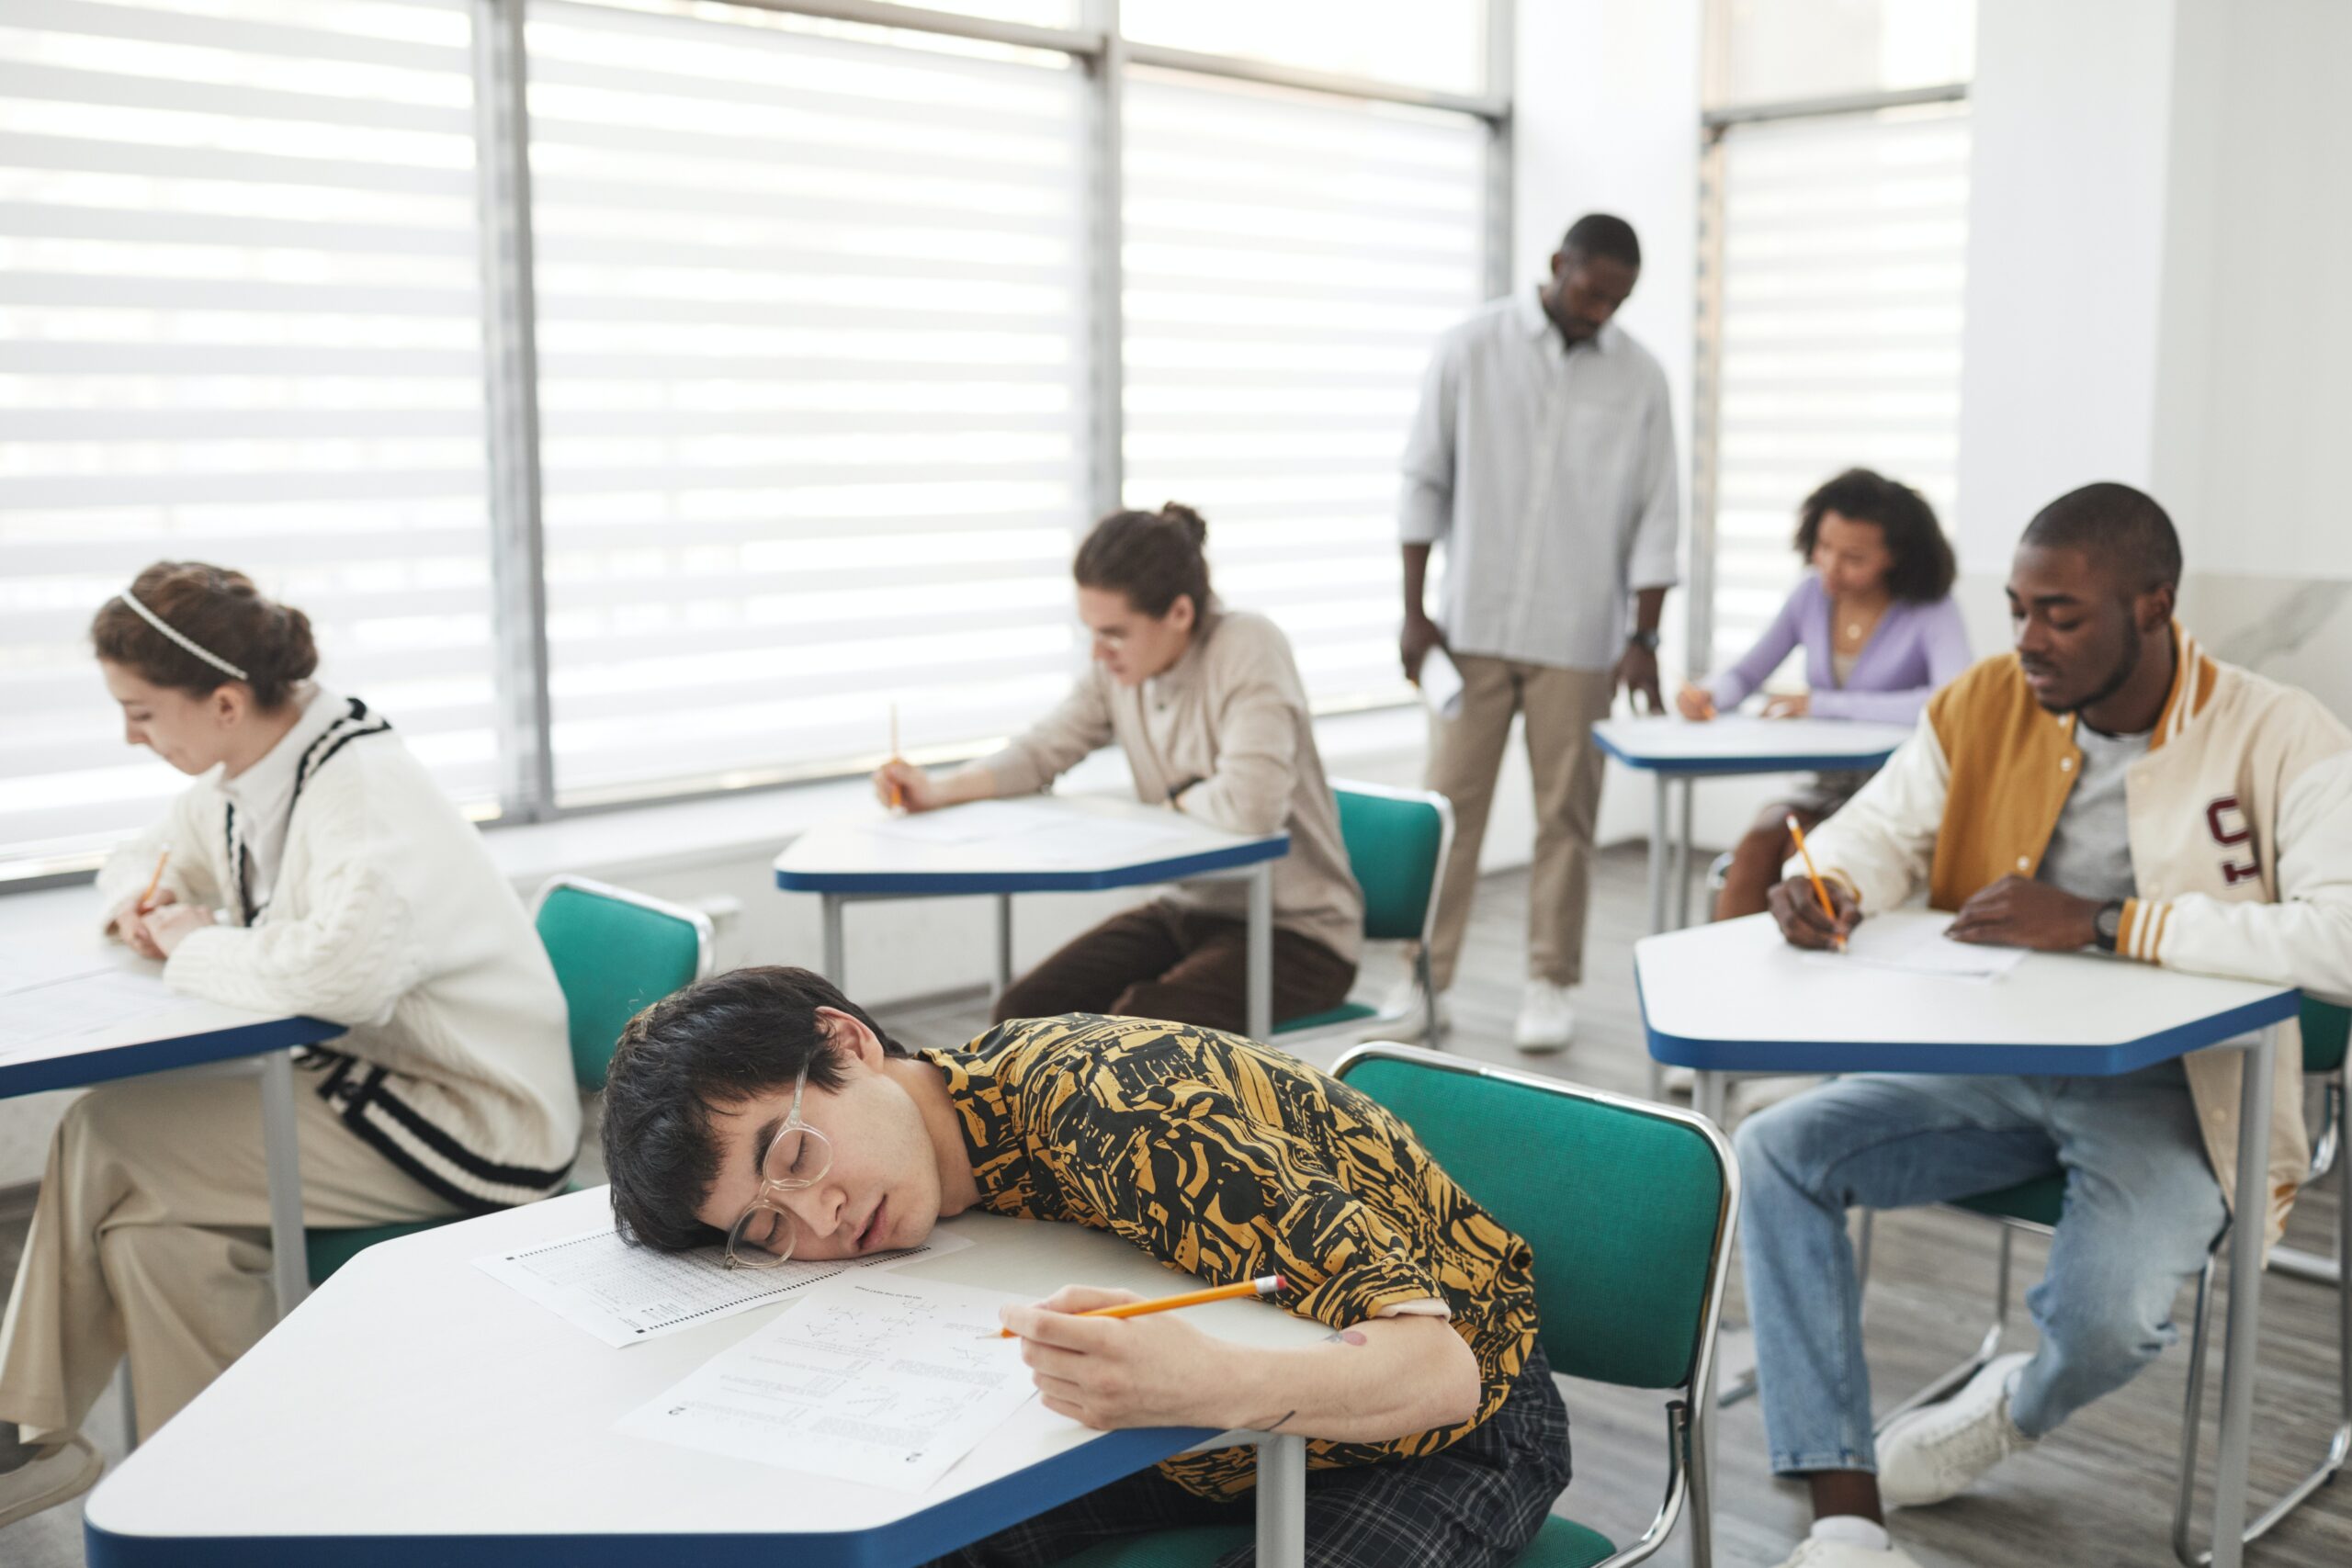 Why students sleep during lectures in class?